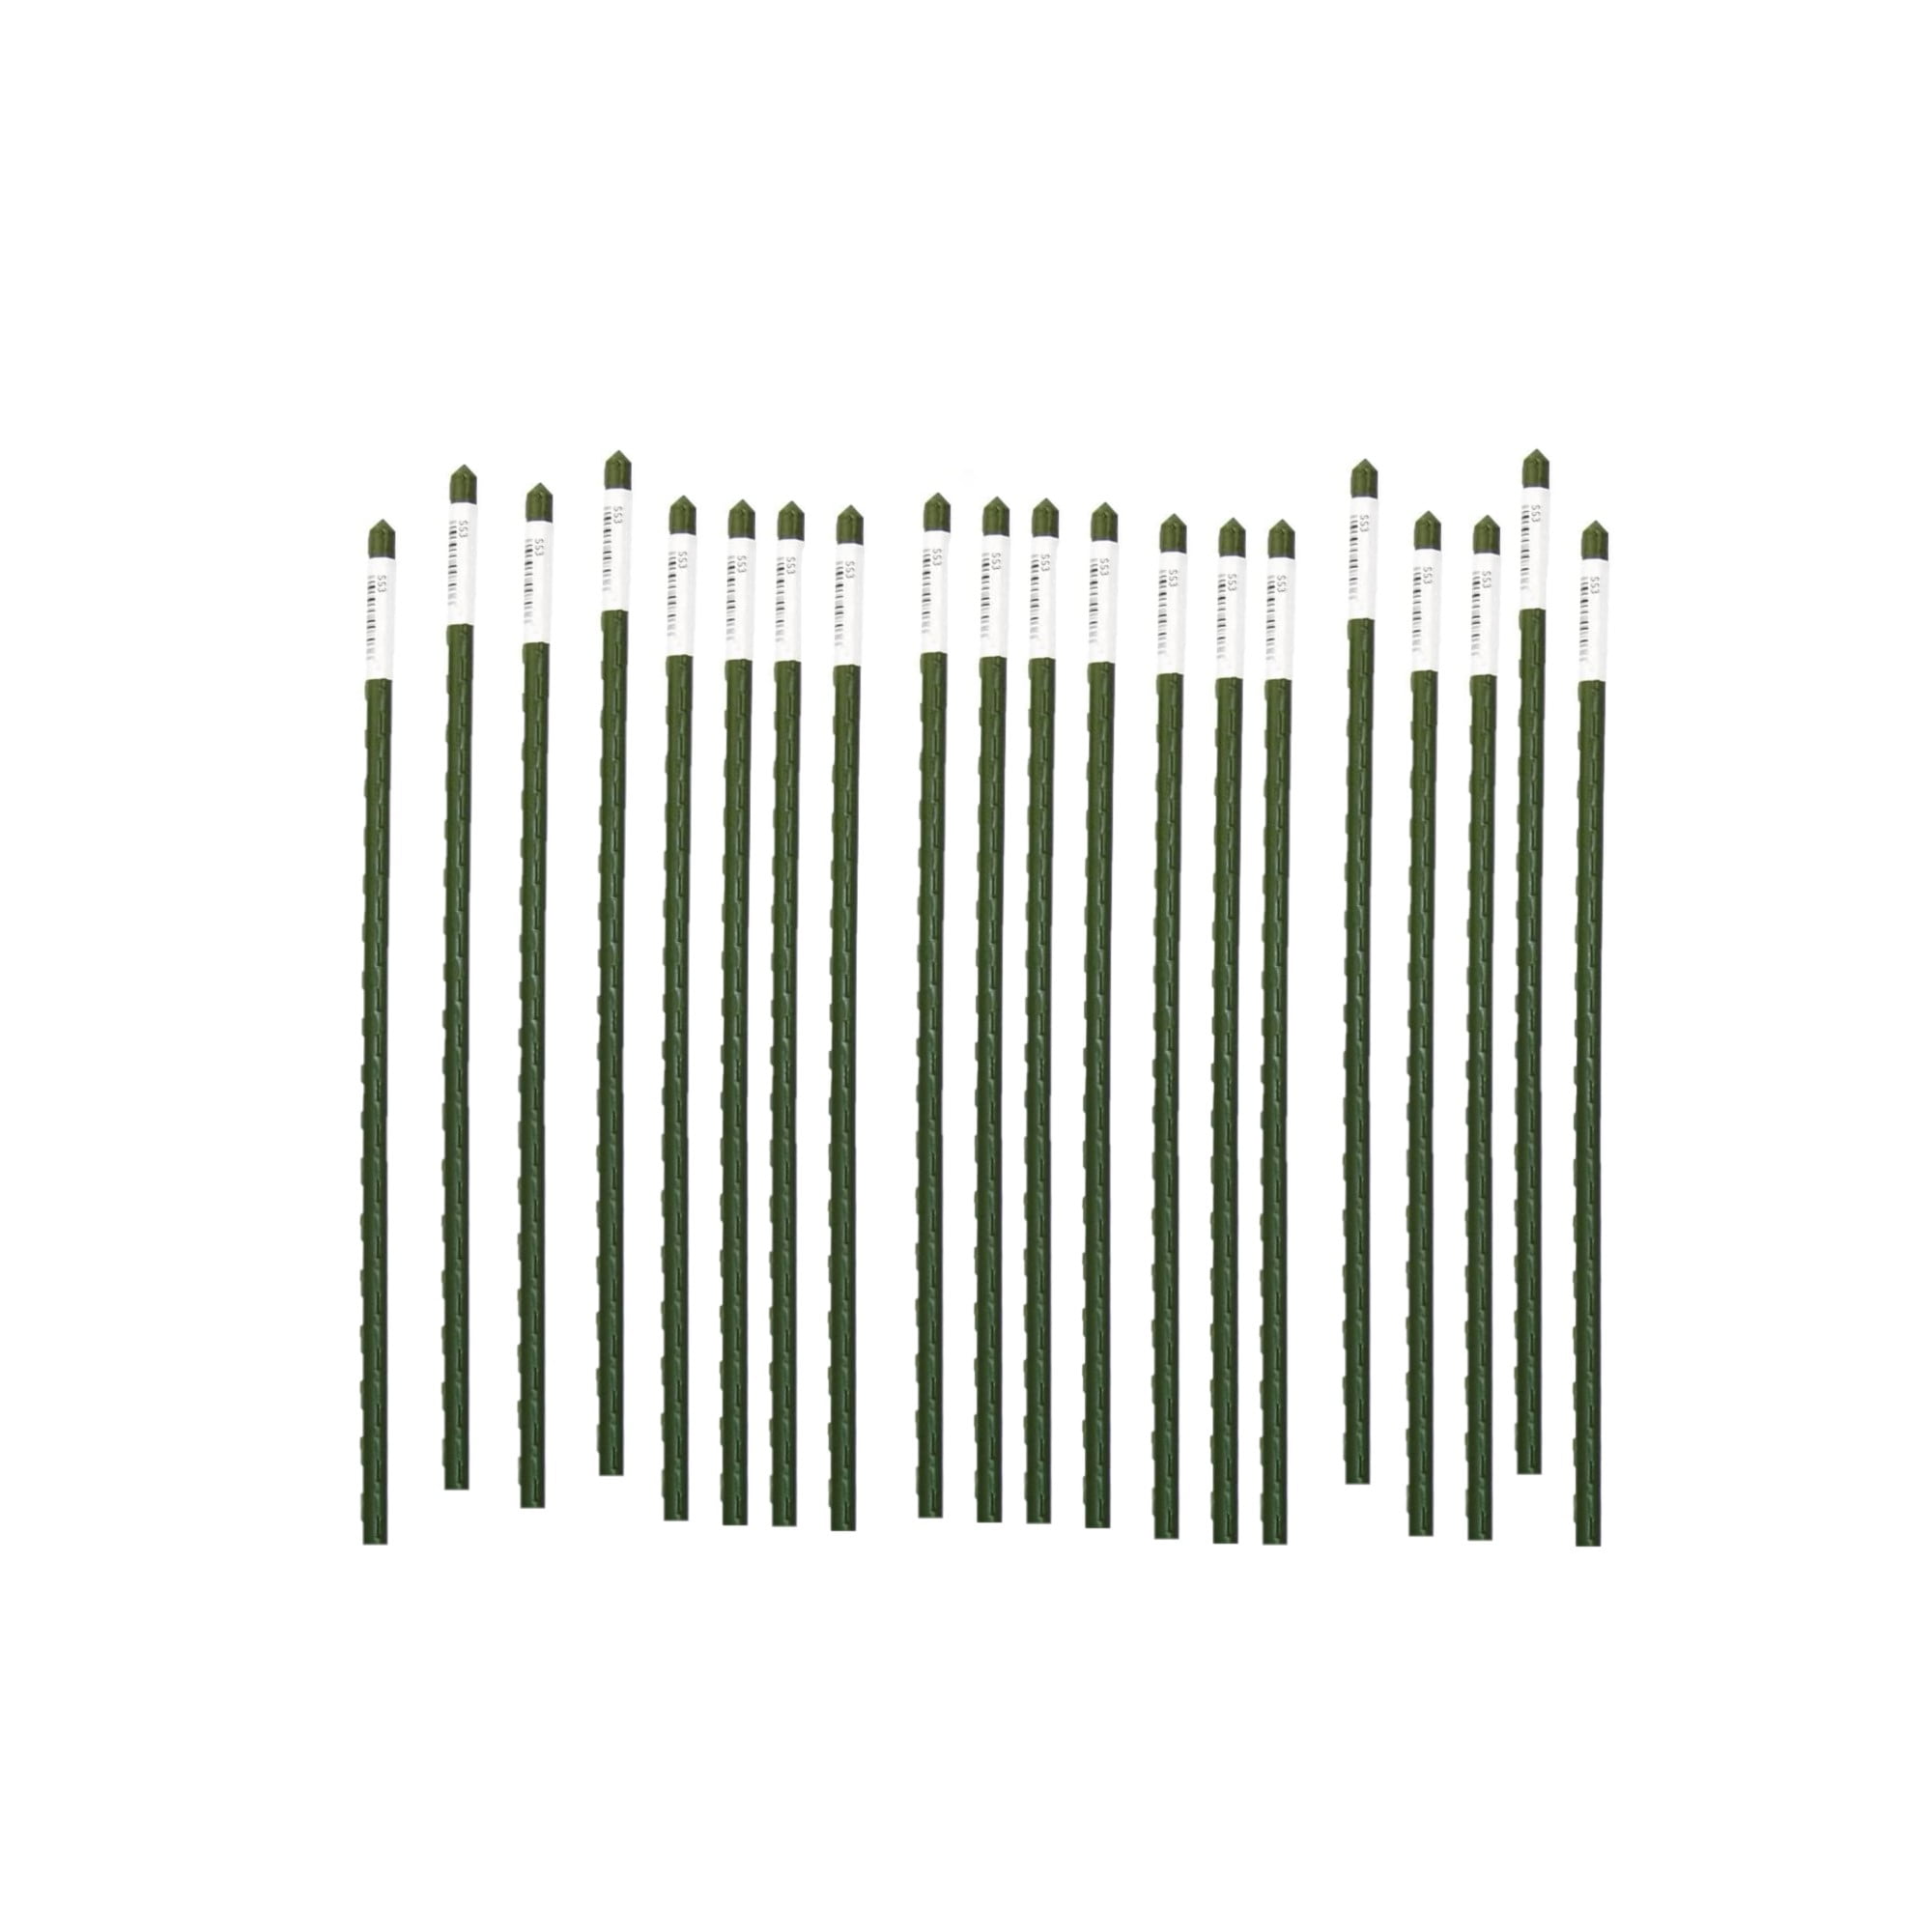 Tie Branches Firmly onto the Bamboo Stake Made from Natural Bamboo Shoots Thickness of Each Stake is between 0.5 to 0.65 Inch in Diameters Environmental Friendly & L HollandBasics Natural Bamboo Stake 5 Feet Position Each Stake Around the Plant as Needed